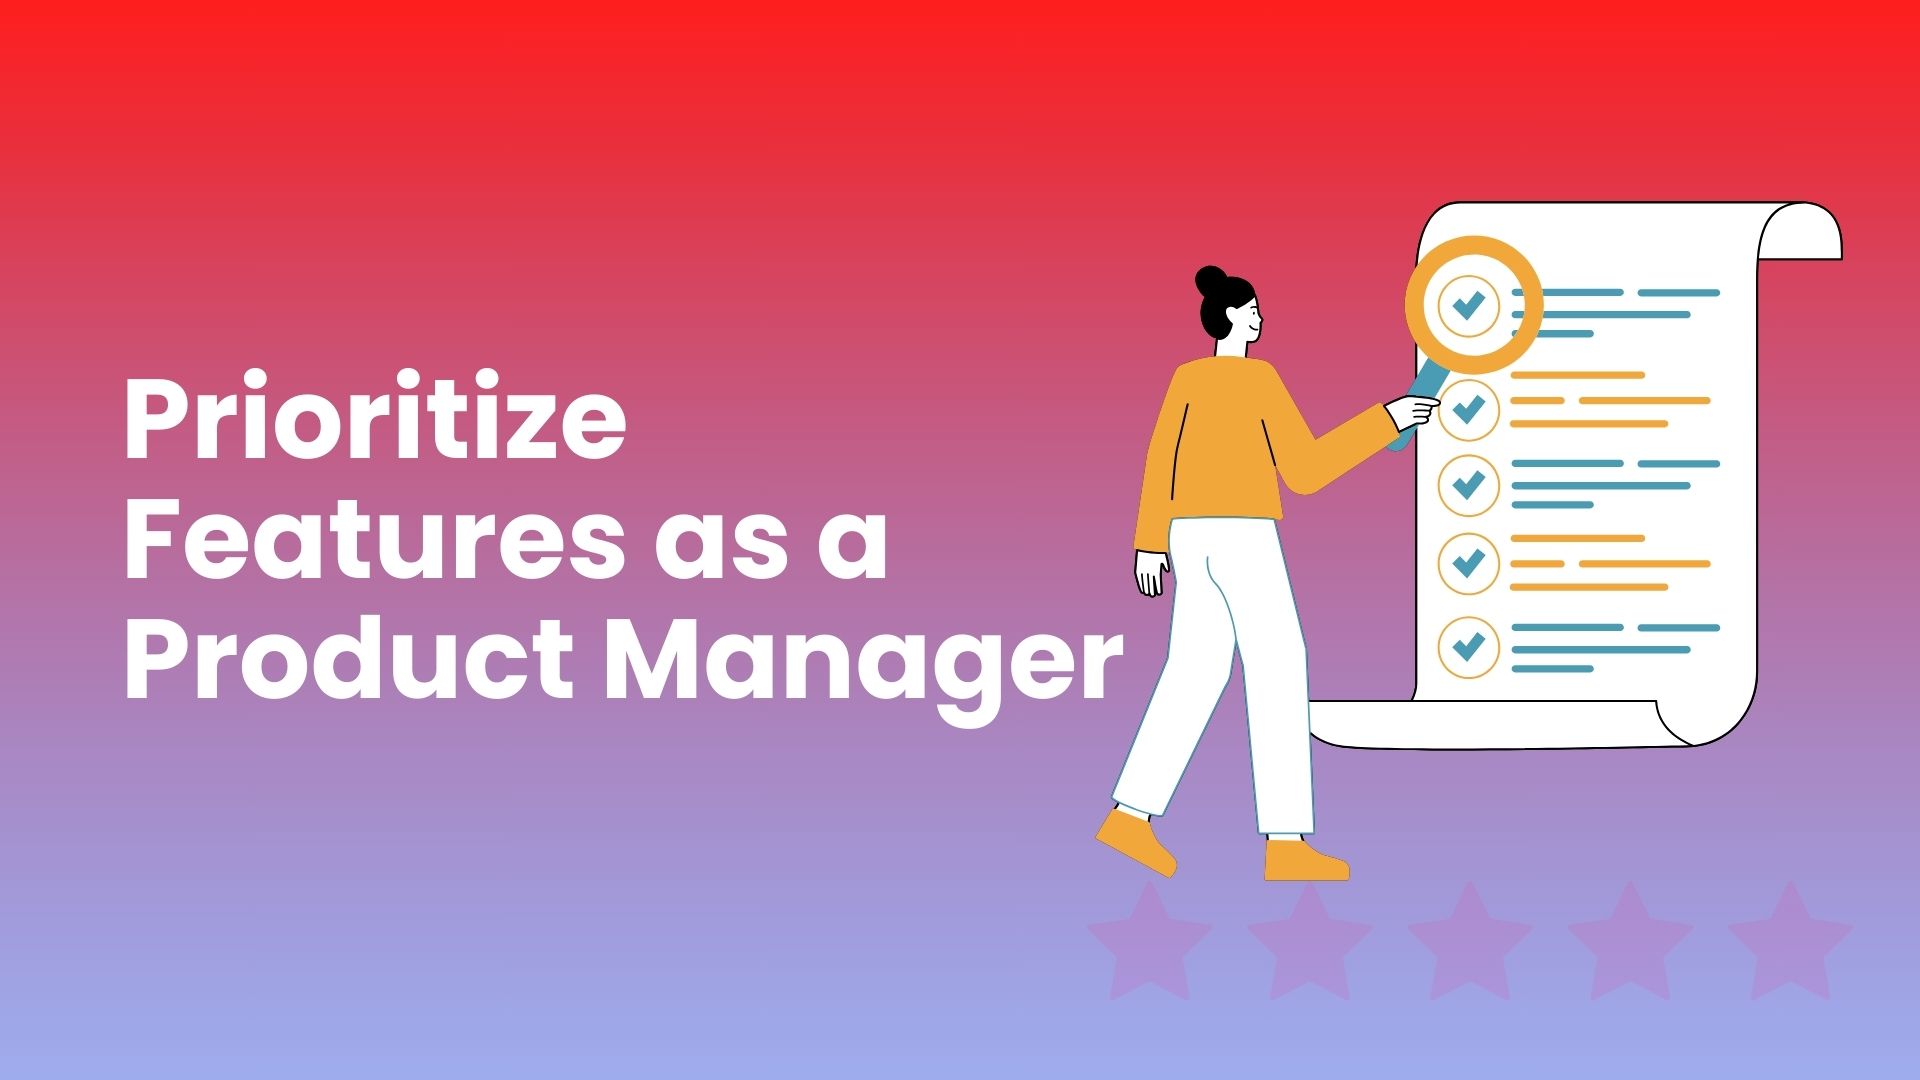 How Do I Prioritize Features as a Product Manager?